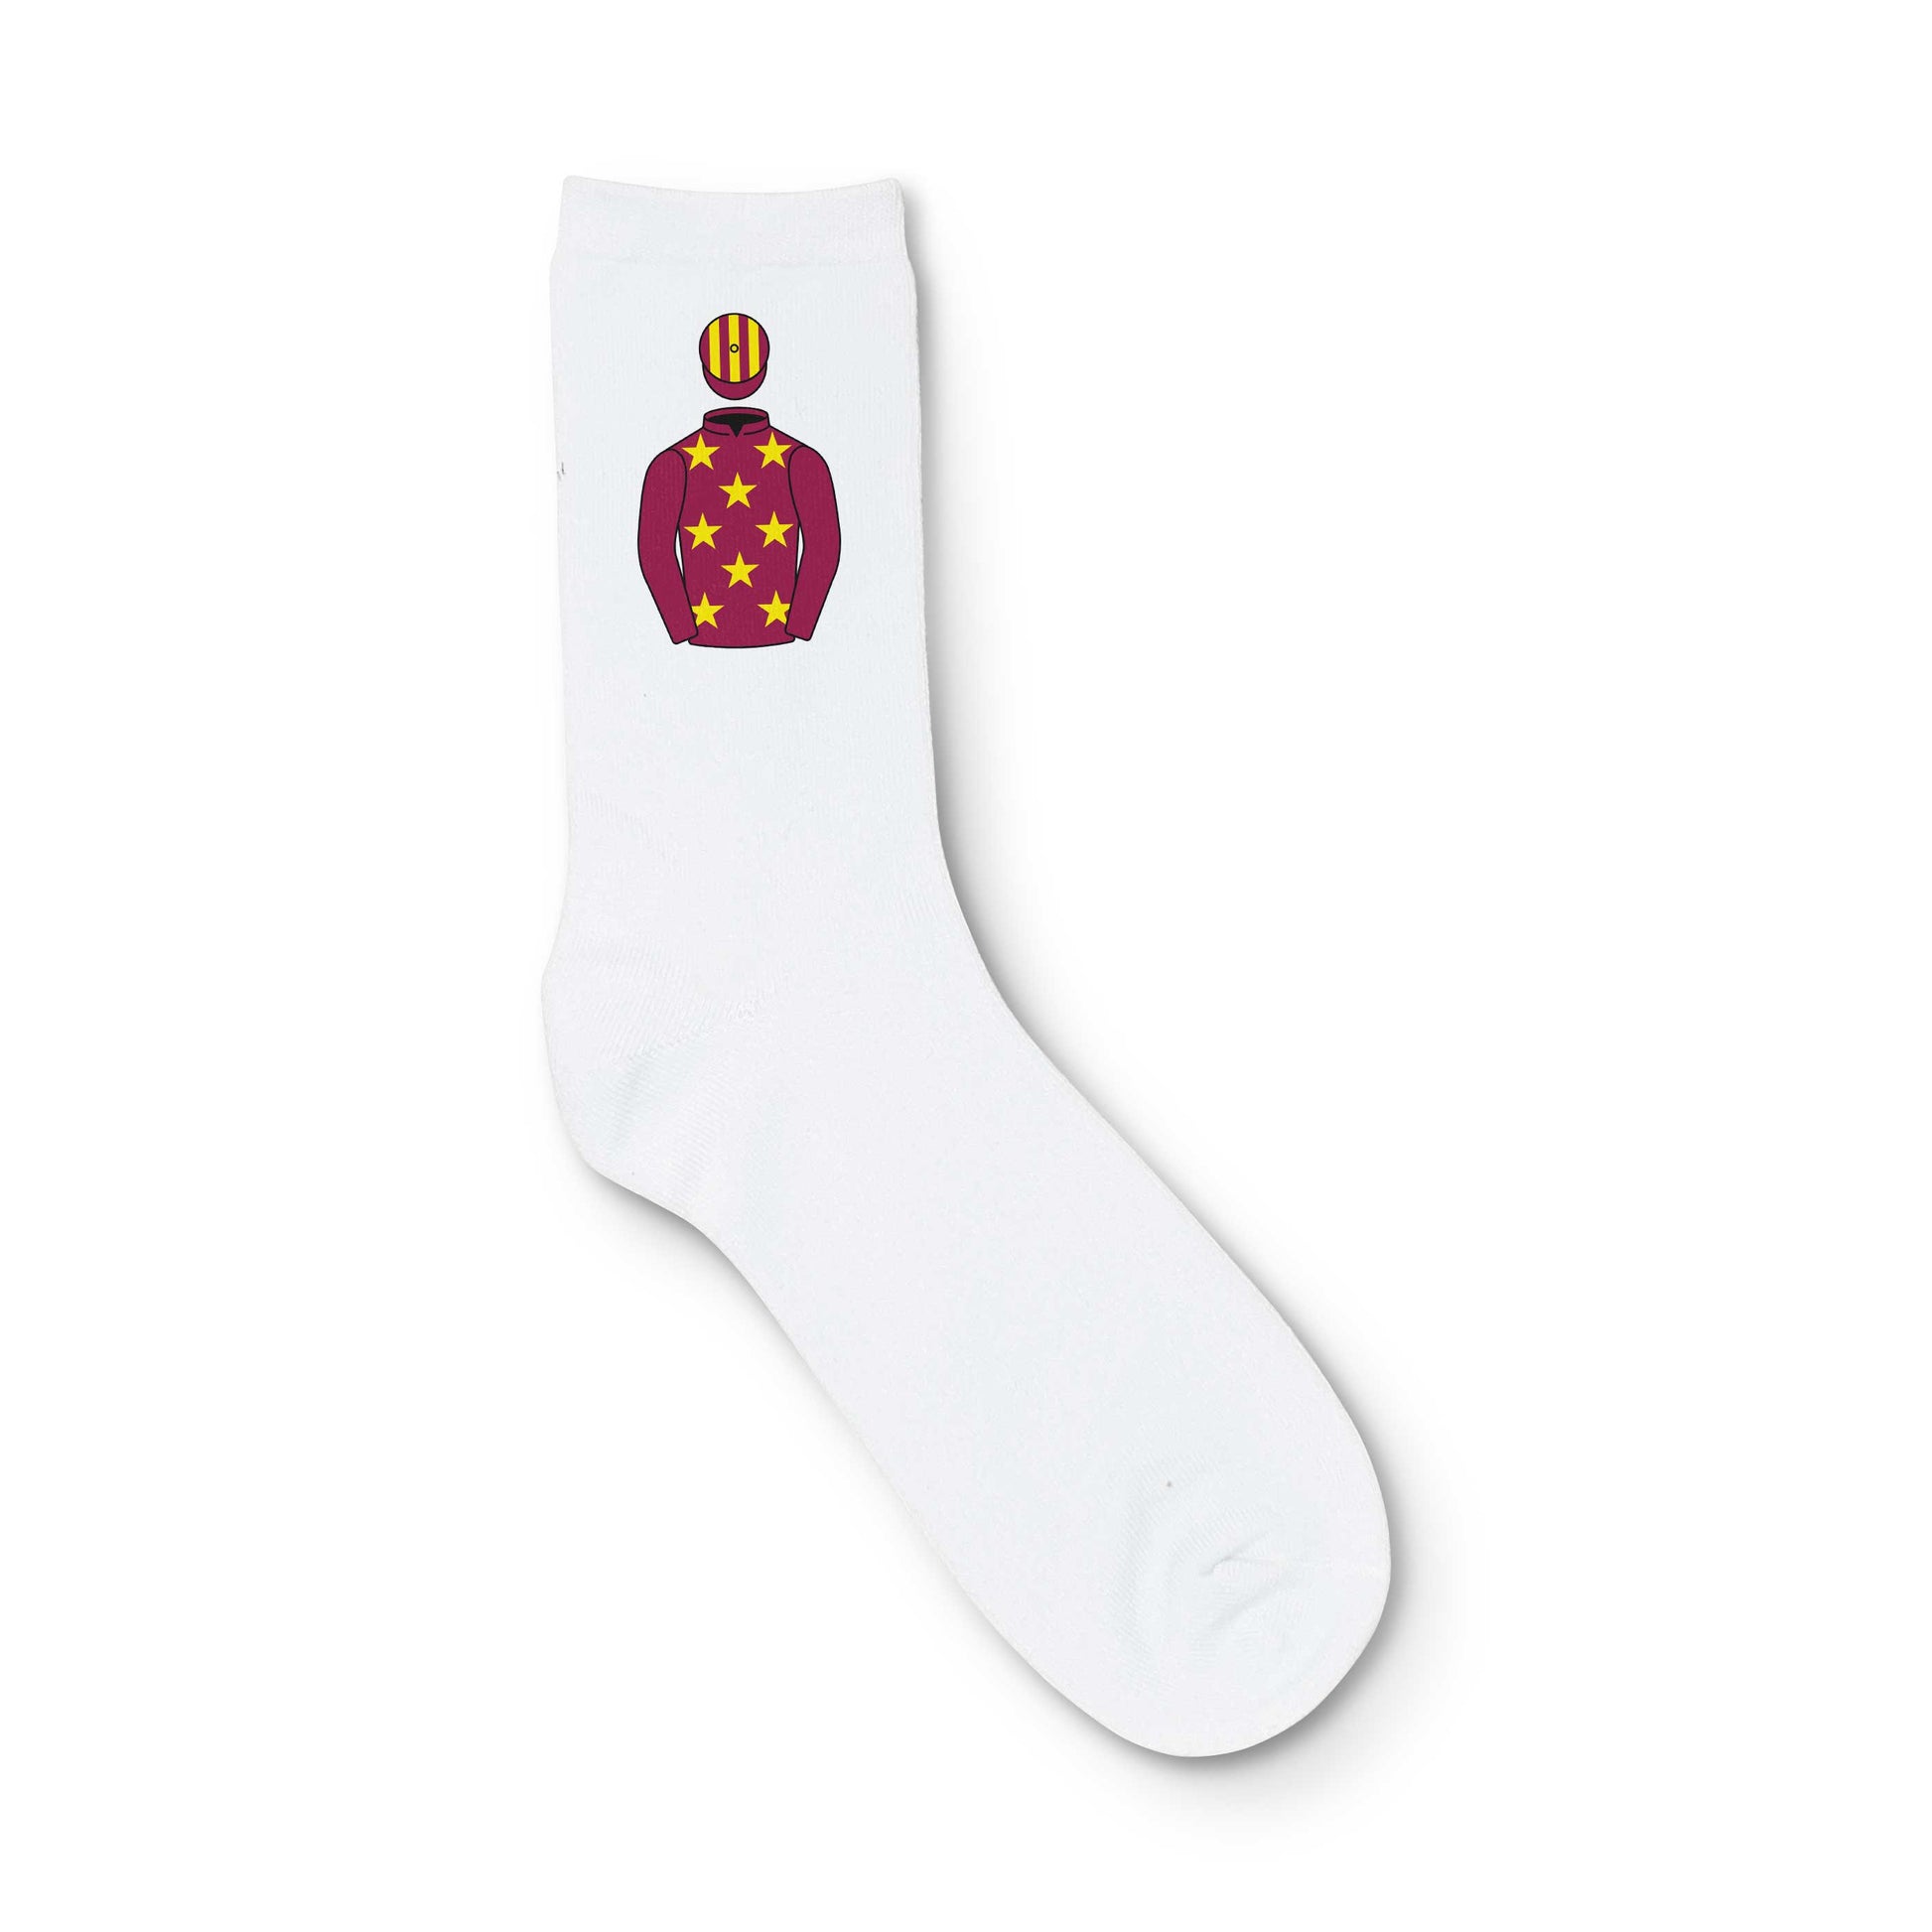 Barry maloney Printed Sock - Printed Sock - Hacked Up